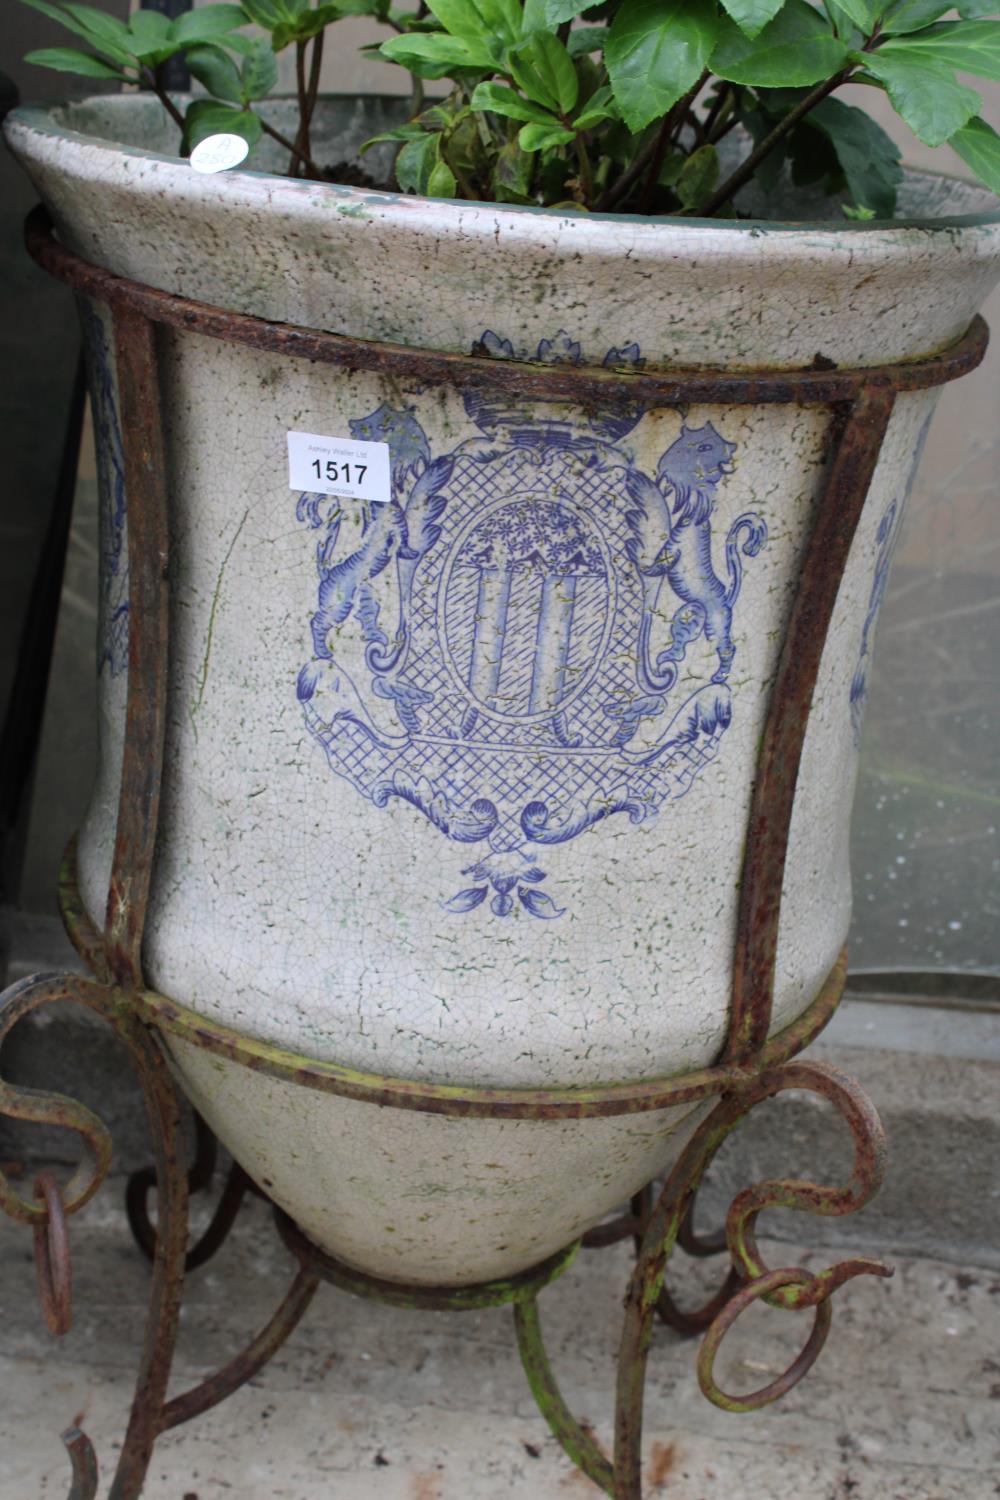 A DECORATIVE VINTAGE BLUE AND WHITE GLAZED PLANT POT WITH WROUGHT IRON STAND (H:66CM) - Image 2 of 3